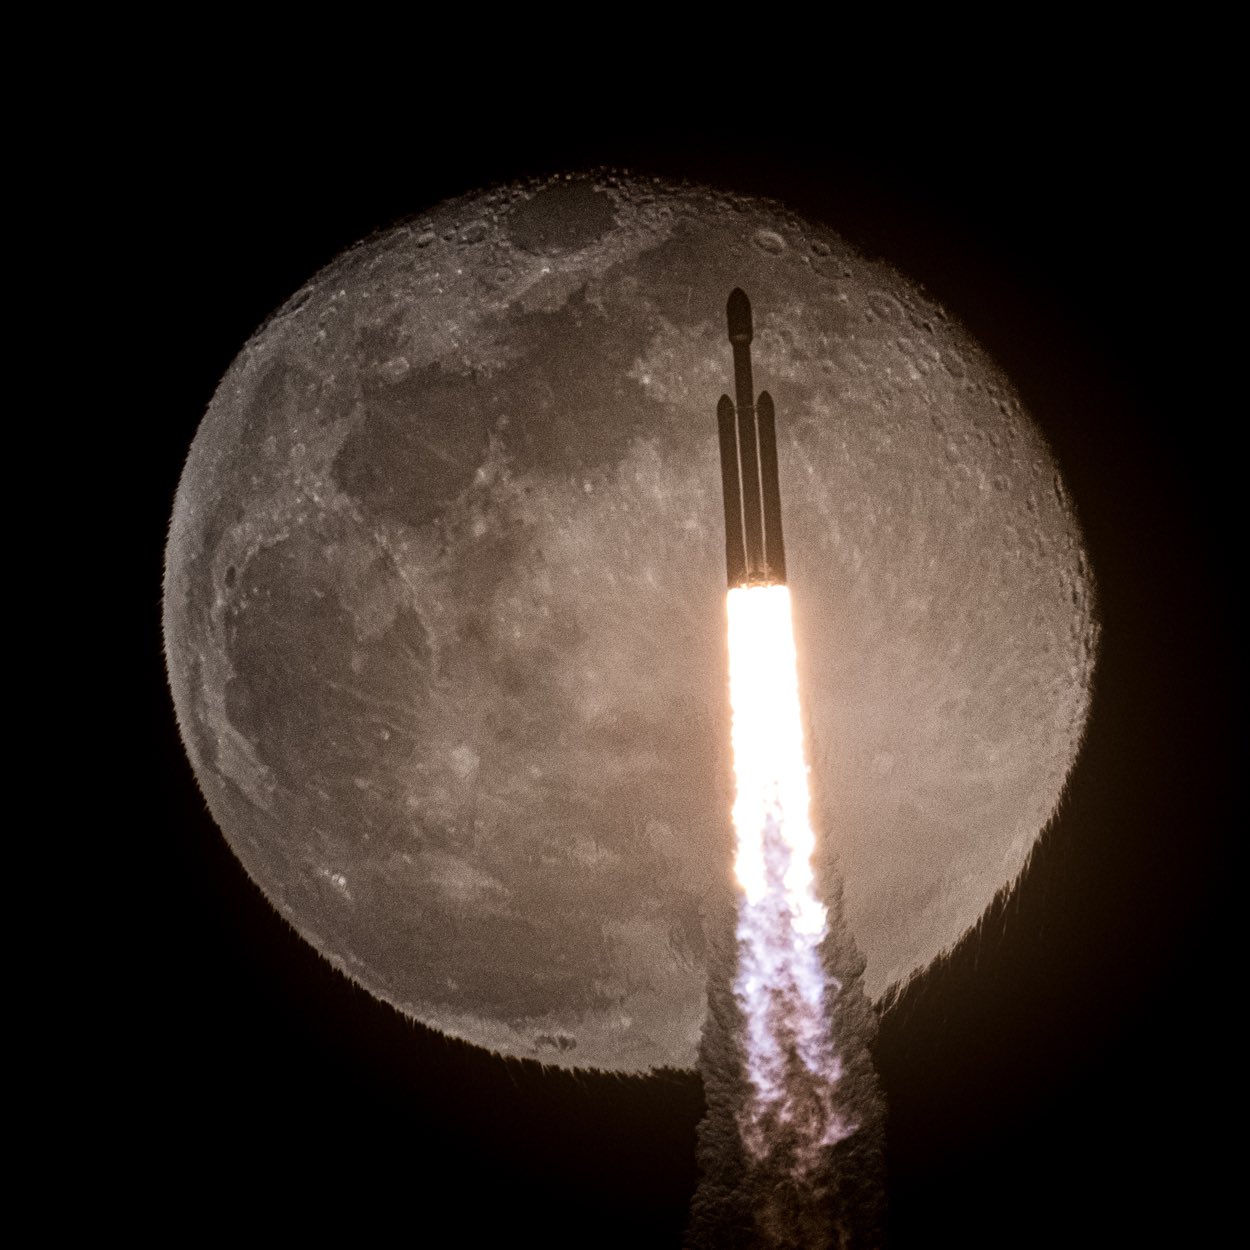 Epic meeting of the Moon and Falcon Heavy is caught on video